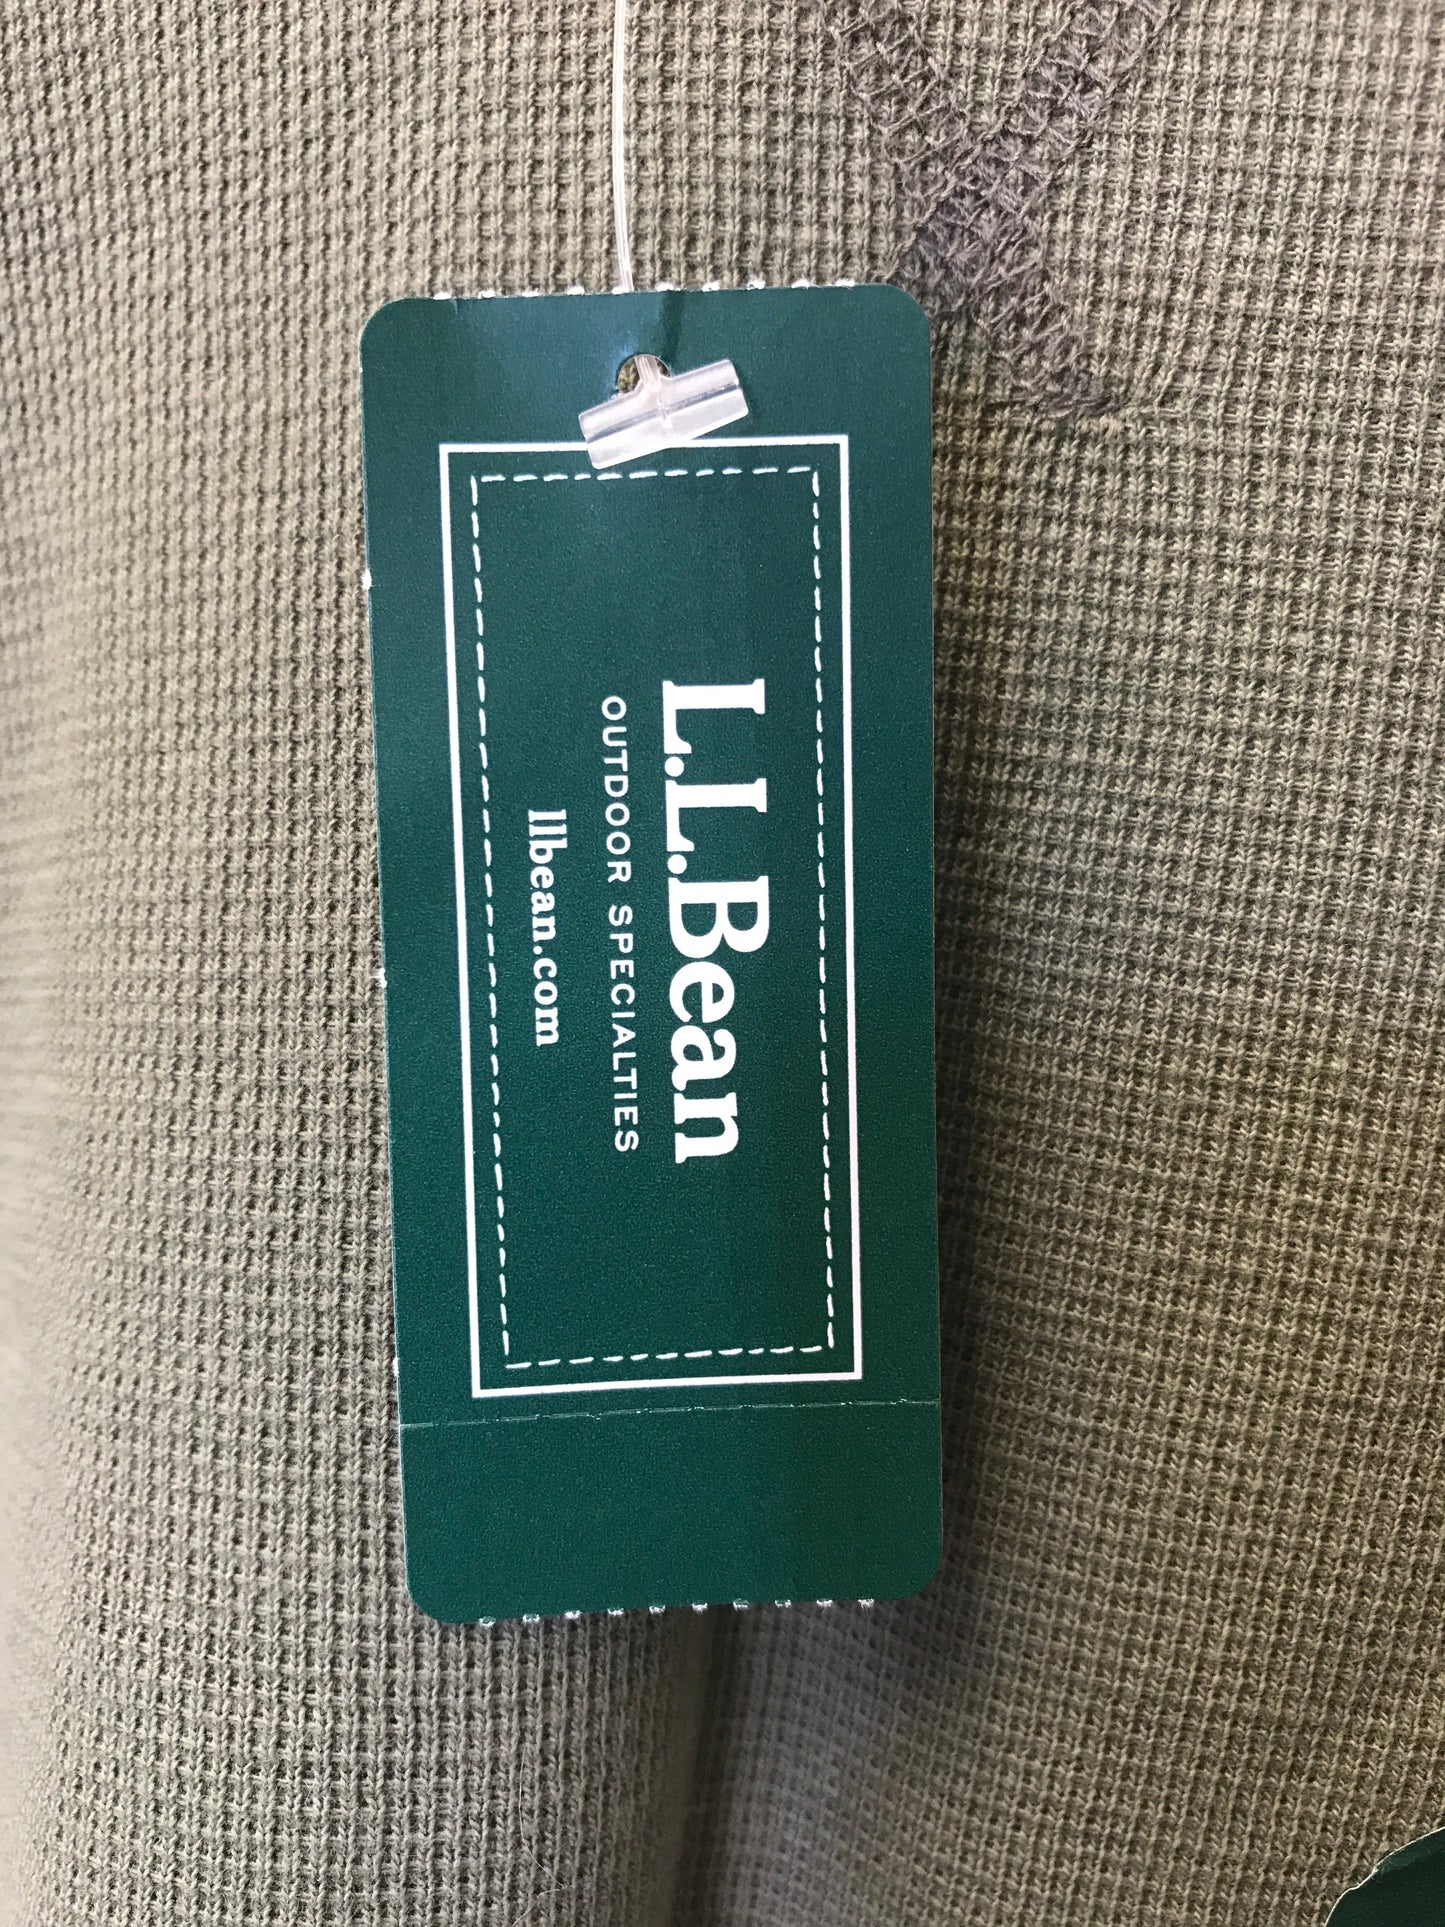 Green Top Long Sleeve By L.l. Bean, Size: 3x